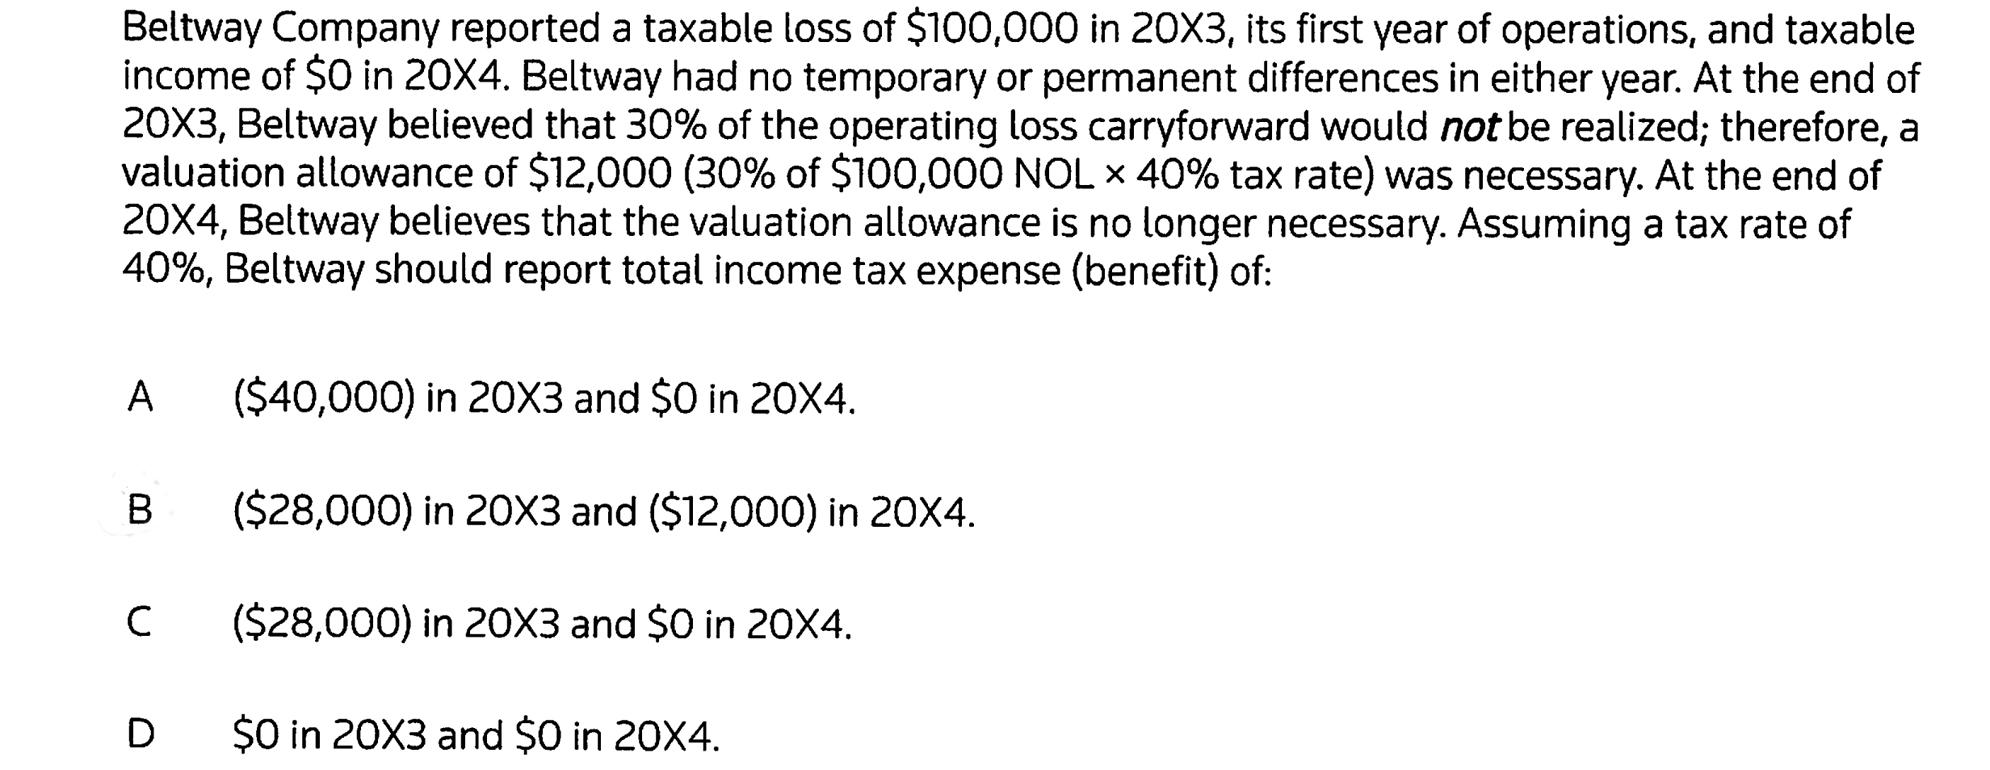 Beltway Company reported a taxable loss of $100,000 in 20X3, its first year of operations, and taxableincome of $0 in 20X4.